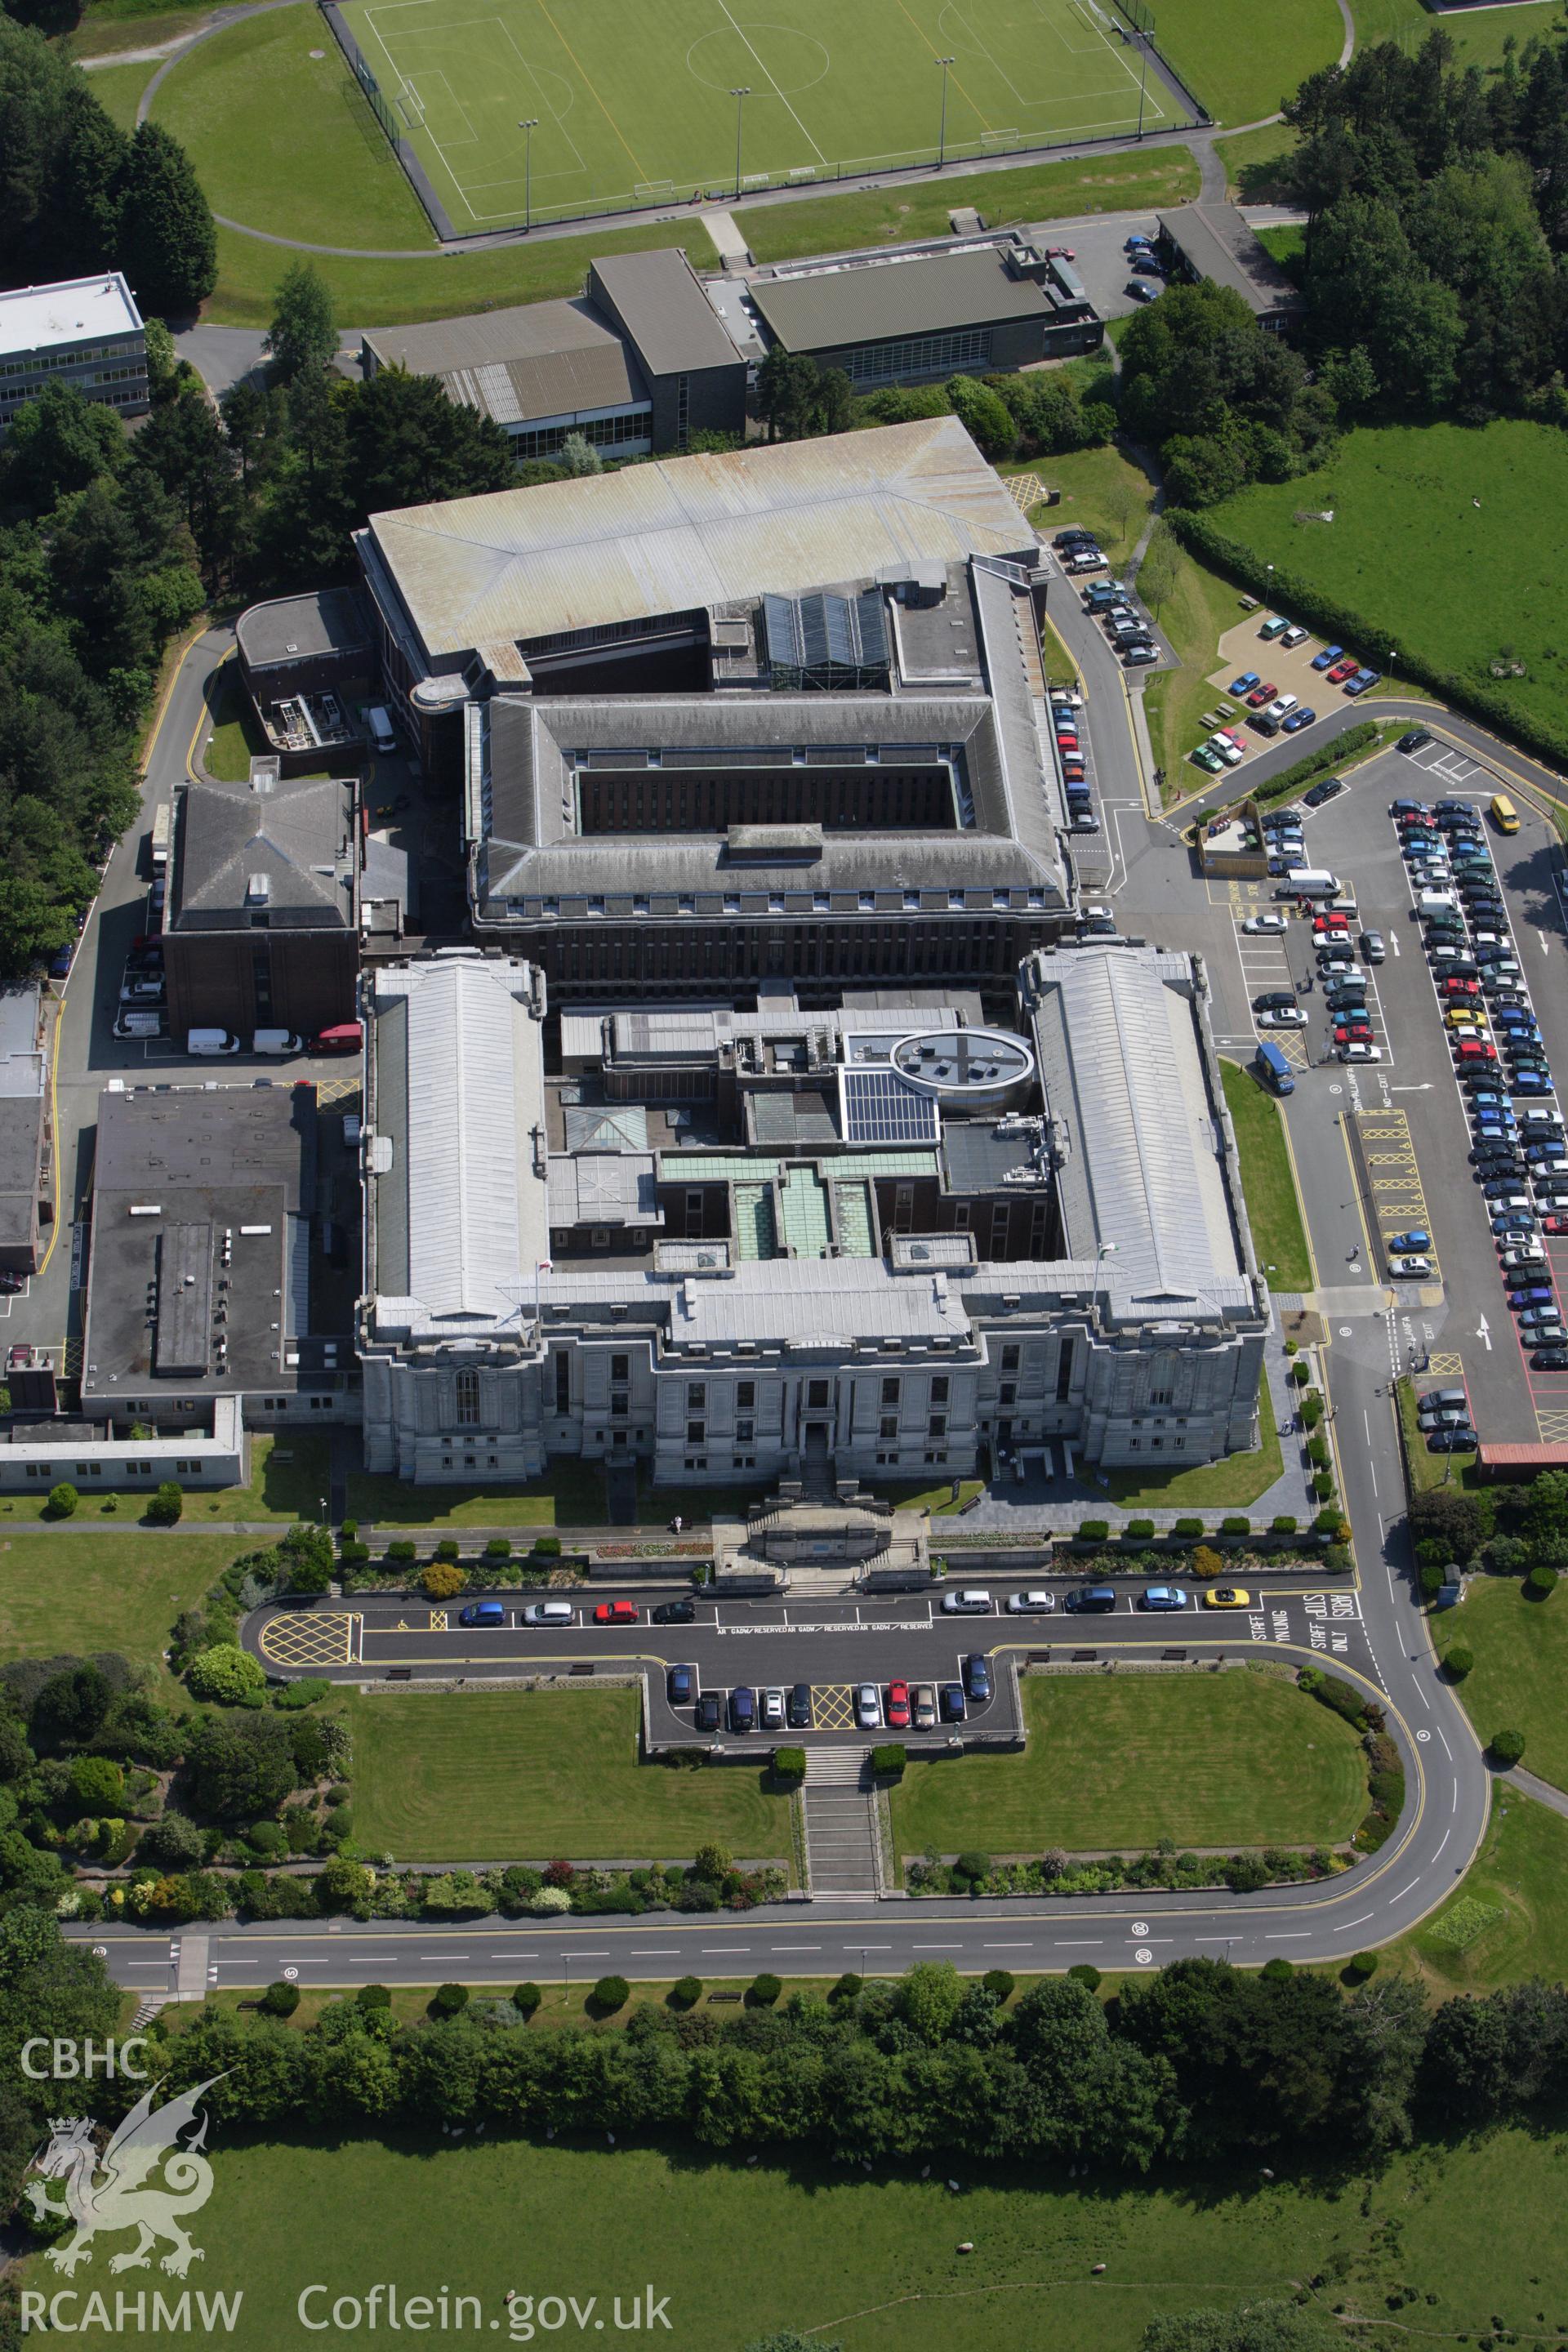 RCAHMW colour oblique aerial photograph of National Library of Wales, Aberystwyth. Taken on 02 June 2009 by Toby Driver